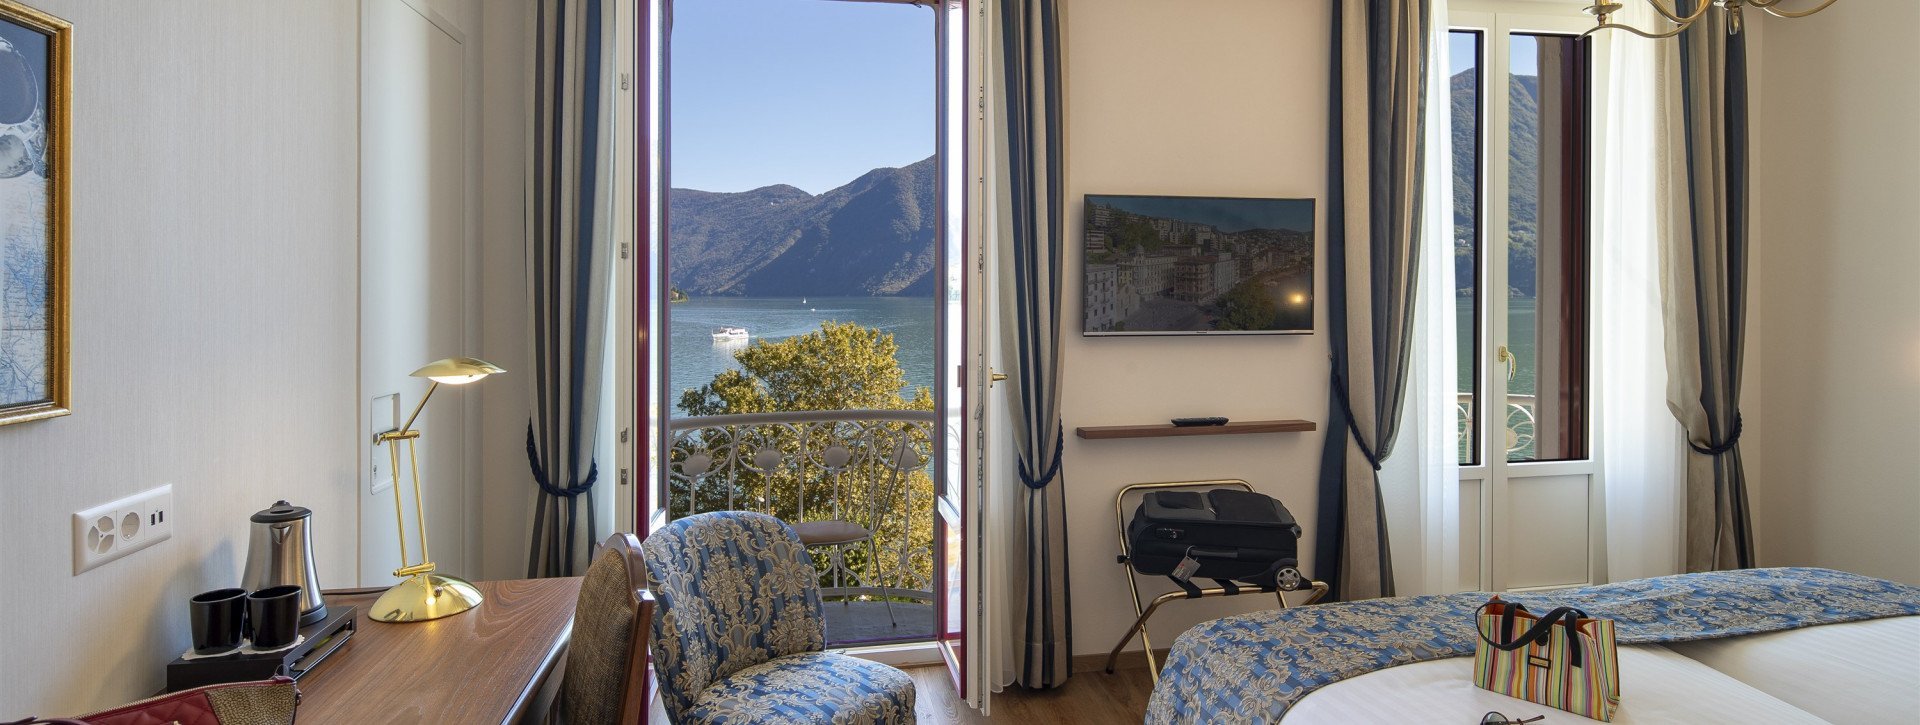 Double Room Panorama with balcony and lake view